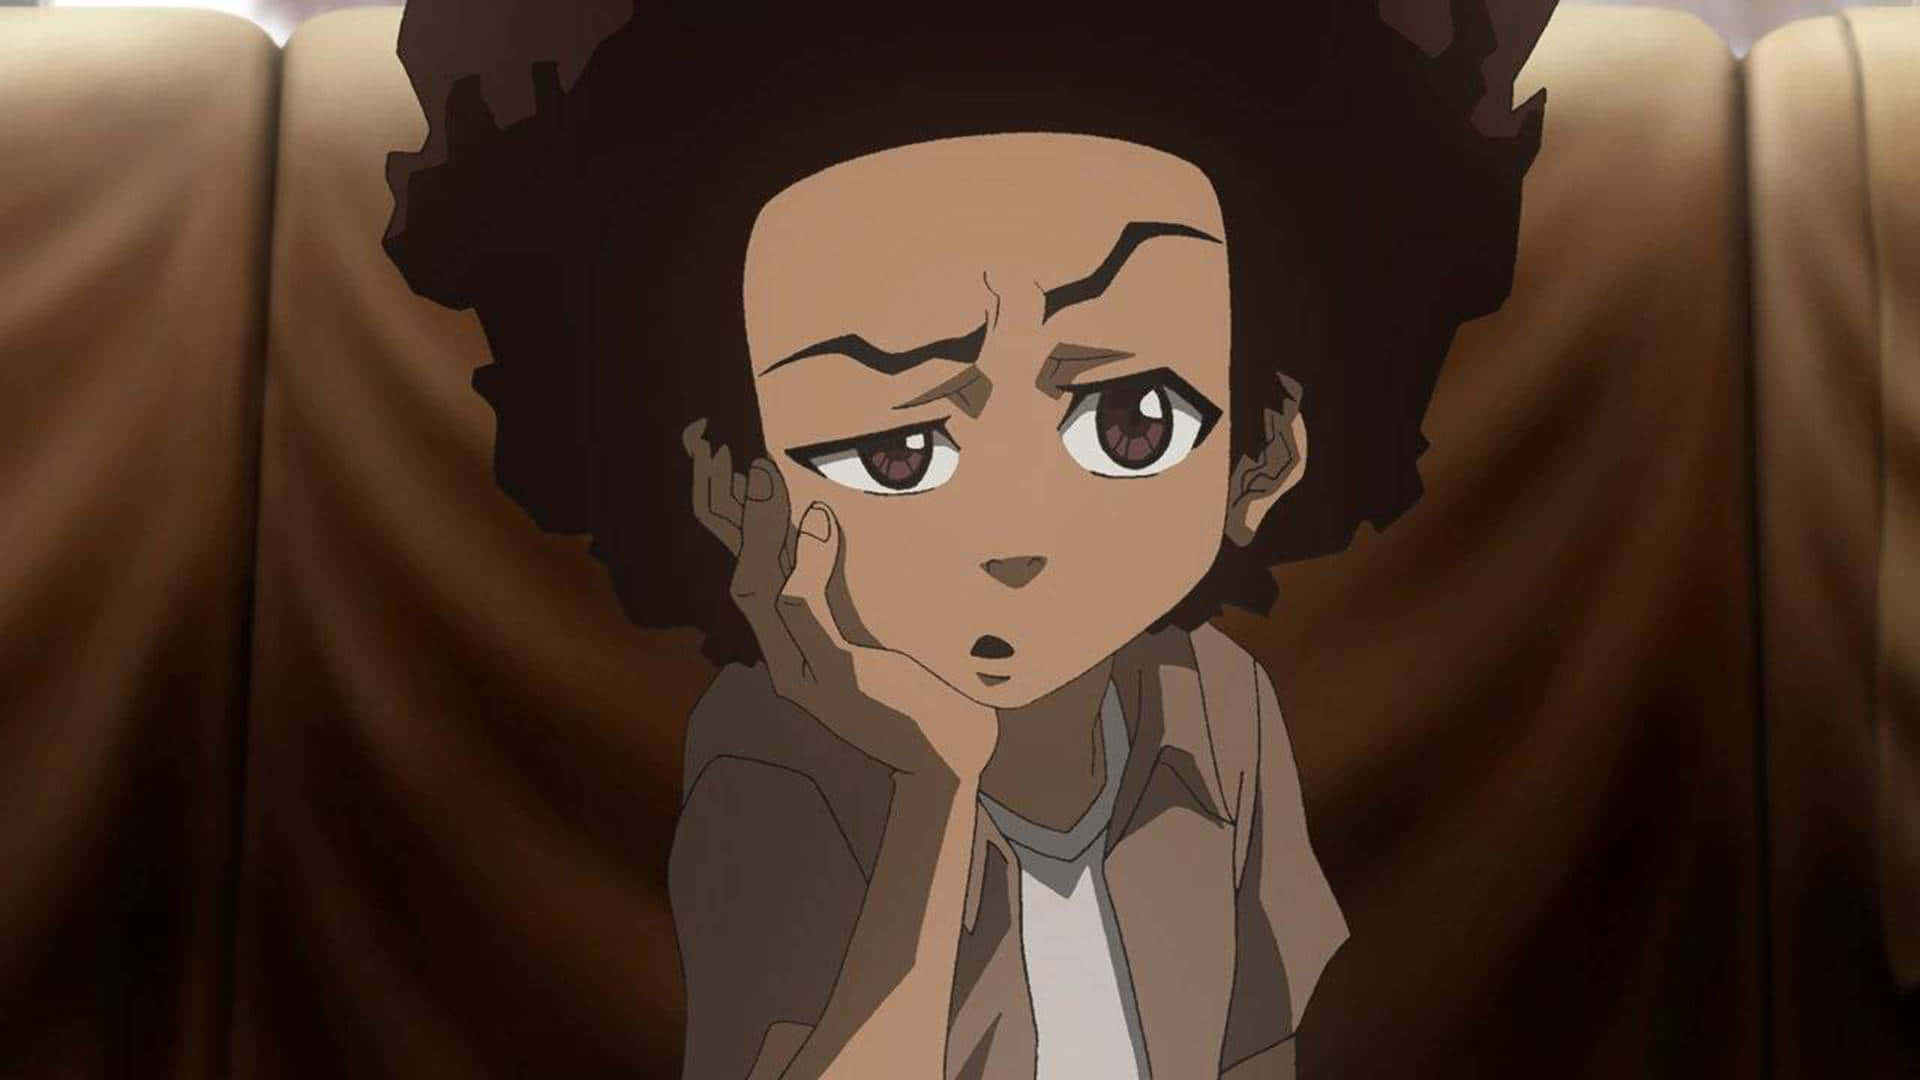 "The Boondocks - Experience the humor and adventure!"